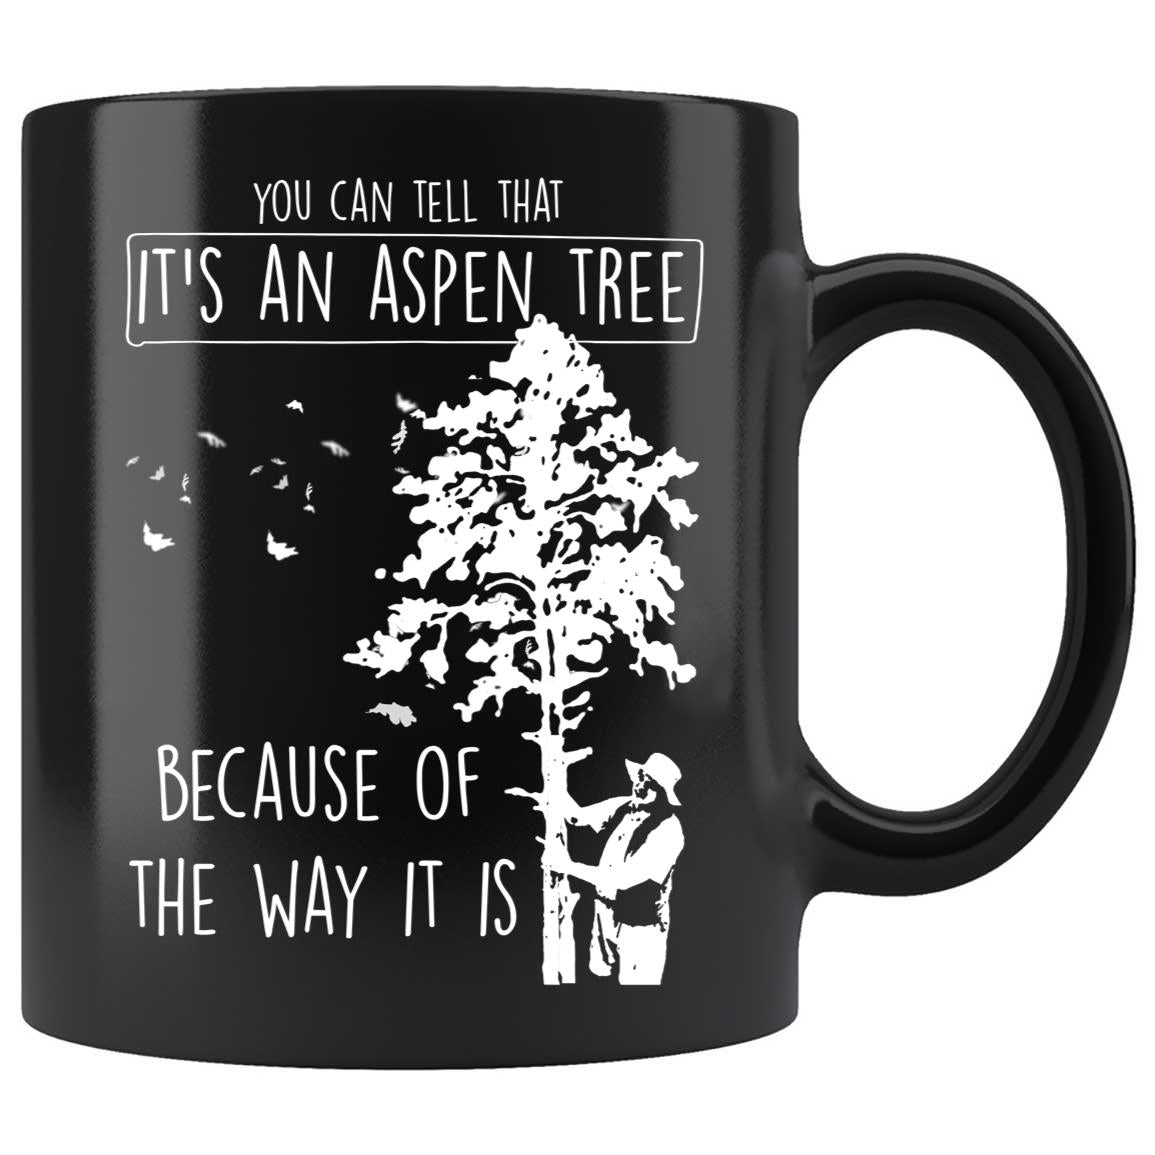 Skitongifts Coffee Mug Funny Ceramic Novelty NH271222-You Can Tell Its An Aspen Tree Because Of The Way 9Ospibd